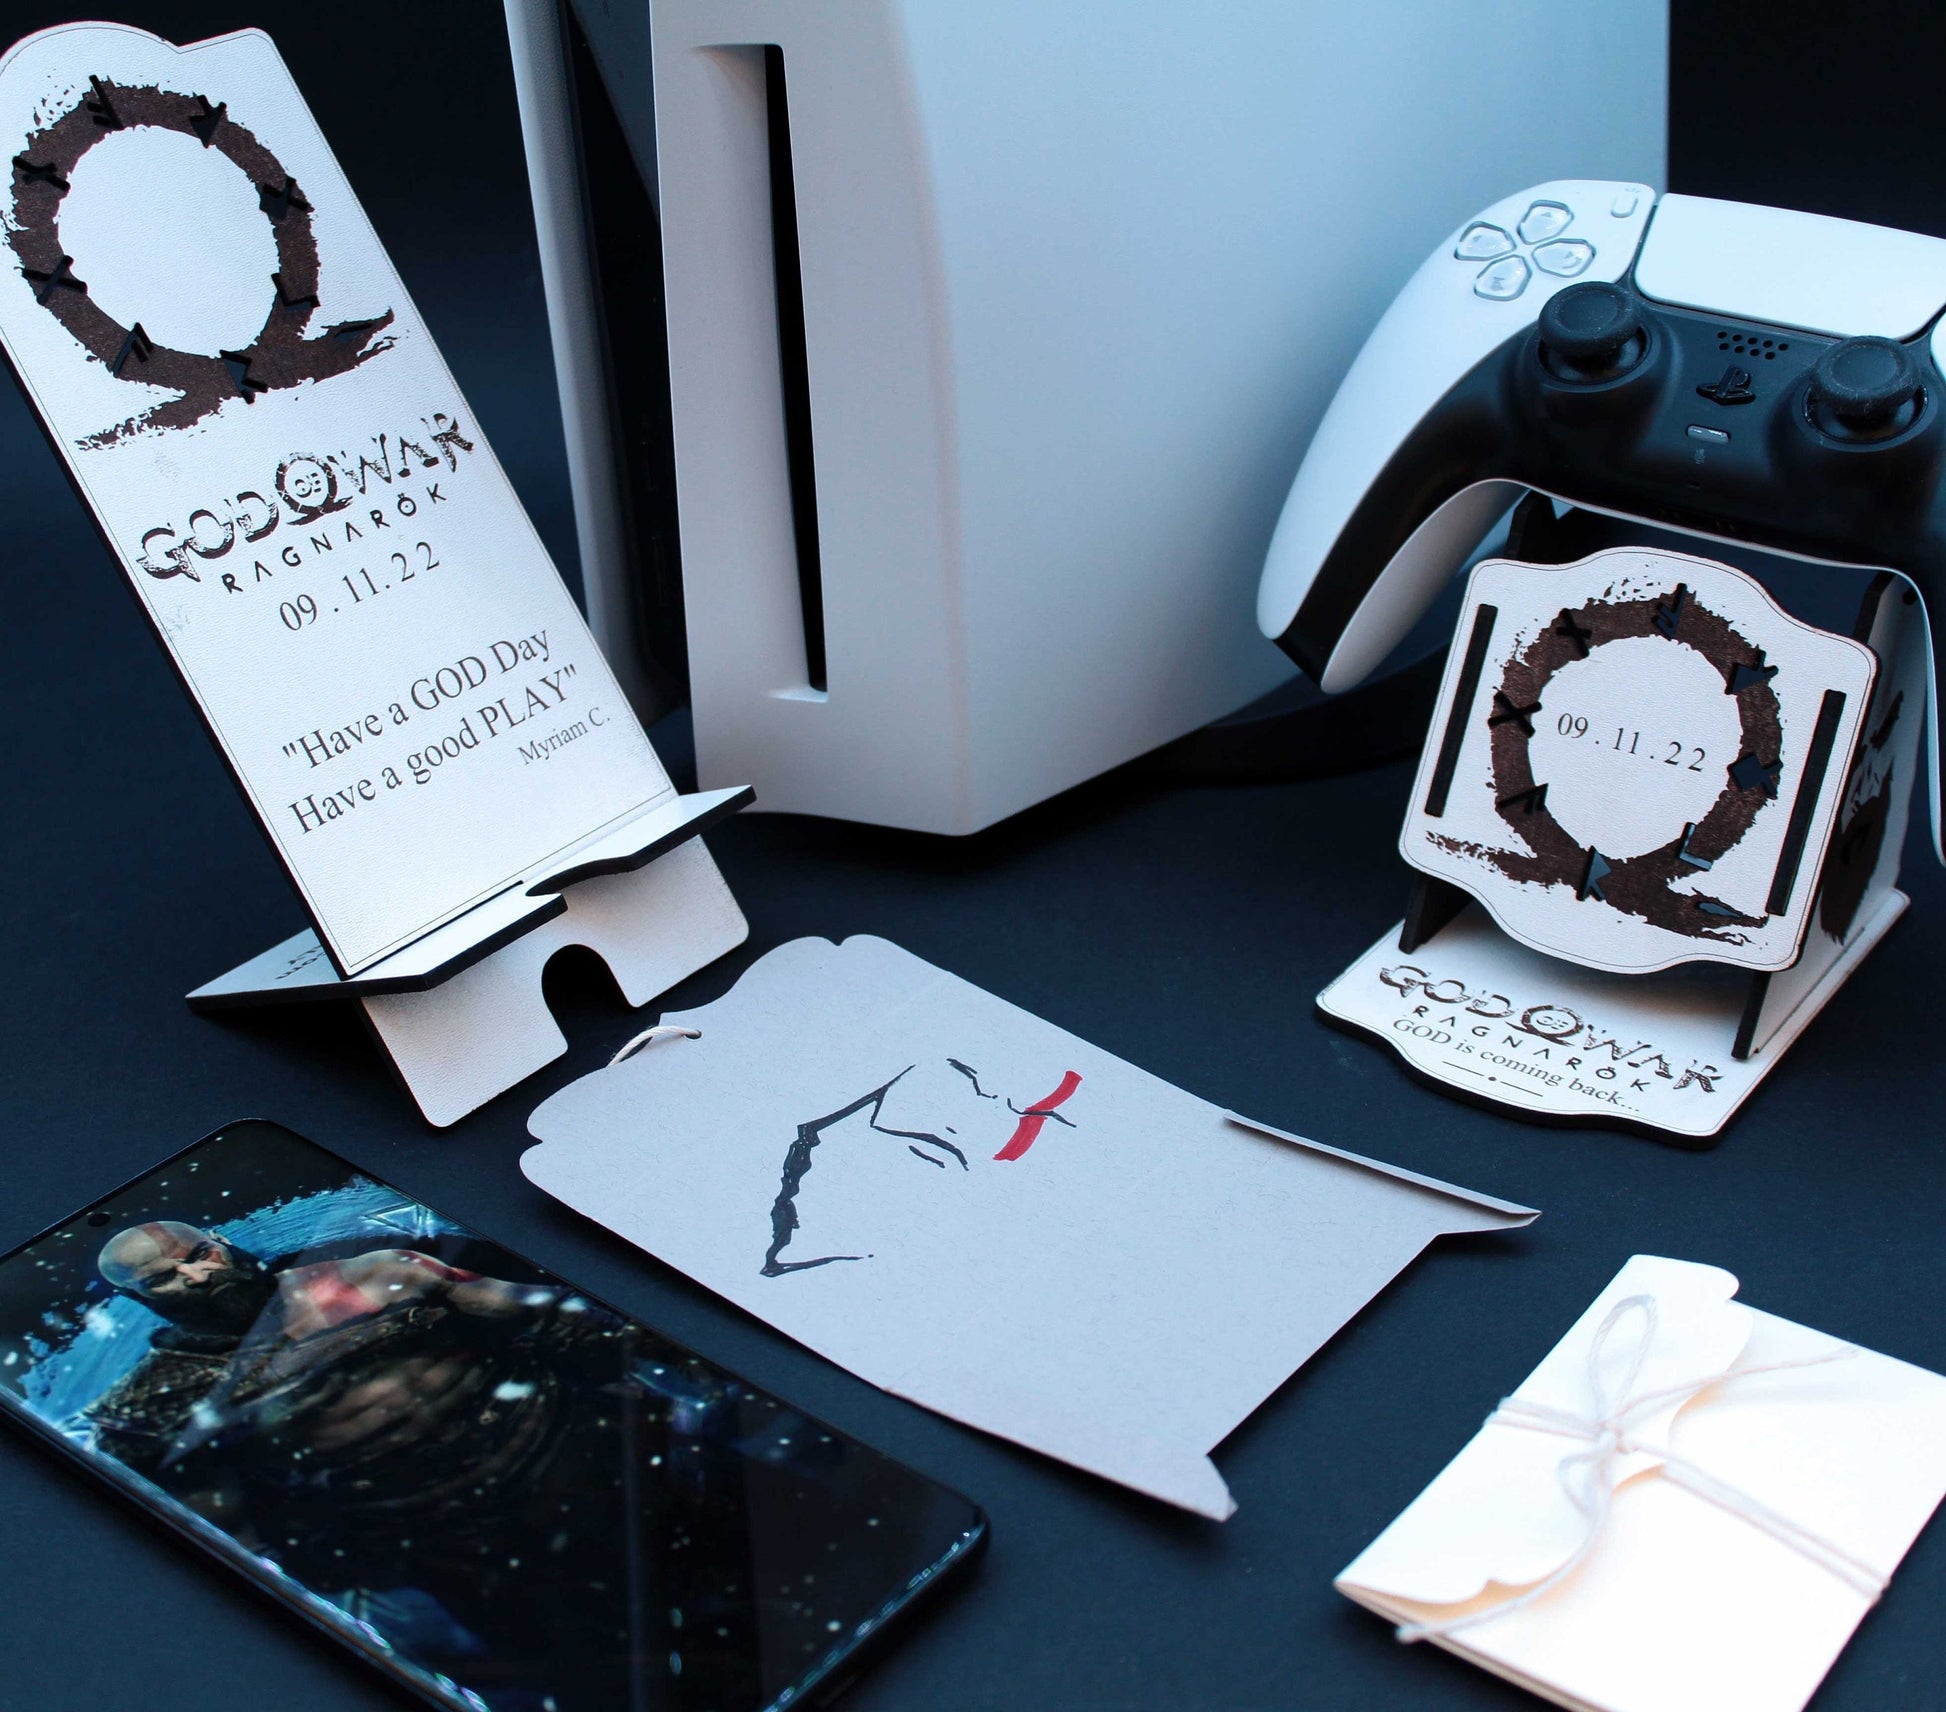 Gif Box Kratos God Of War Ragnarok as a gift: Ps5 controller stand +  smartphone holder + greeting card, ideal as a gift